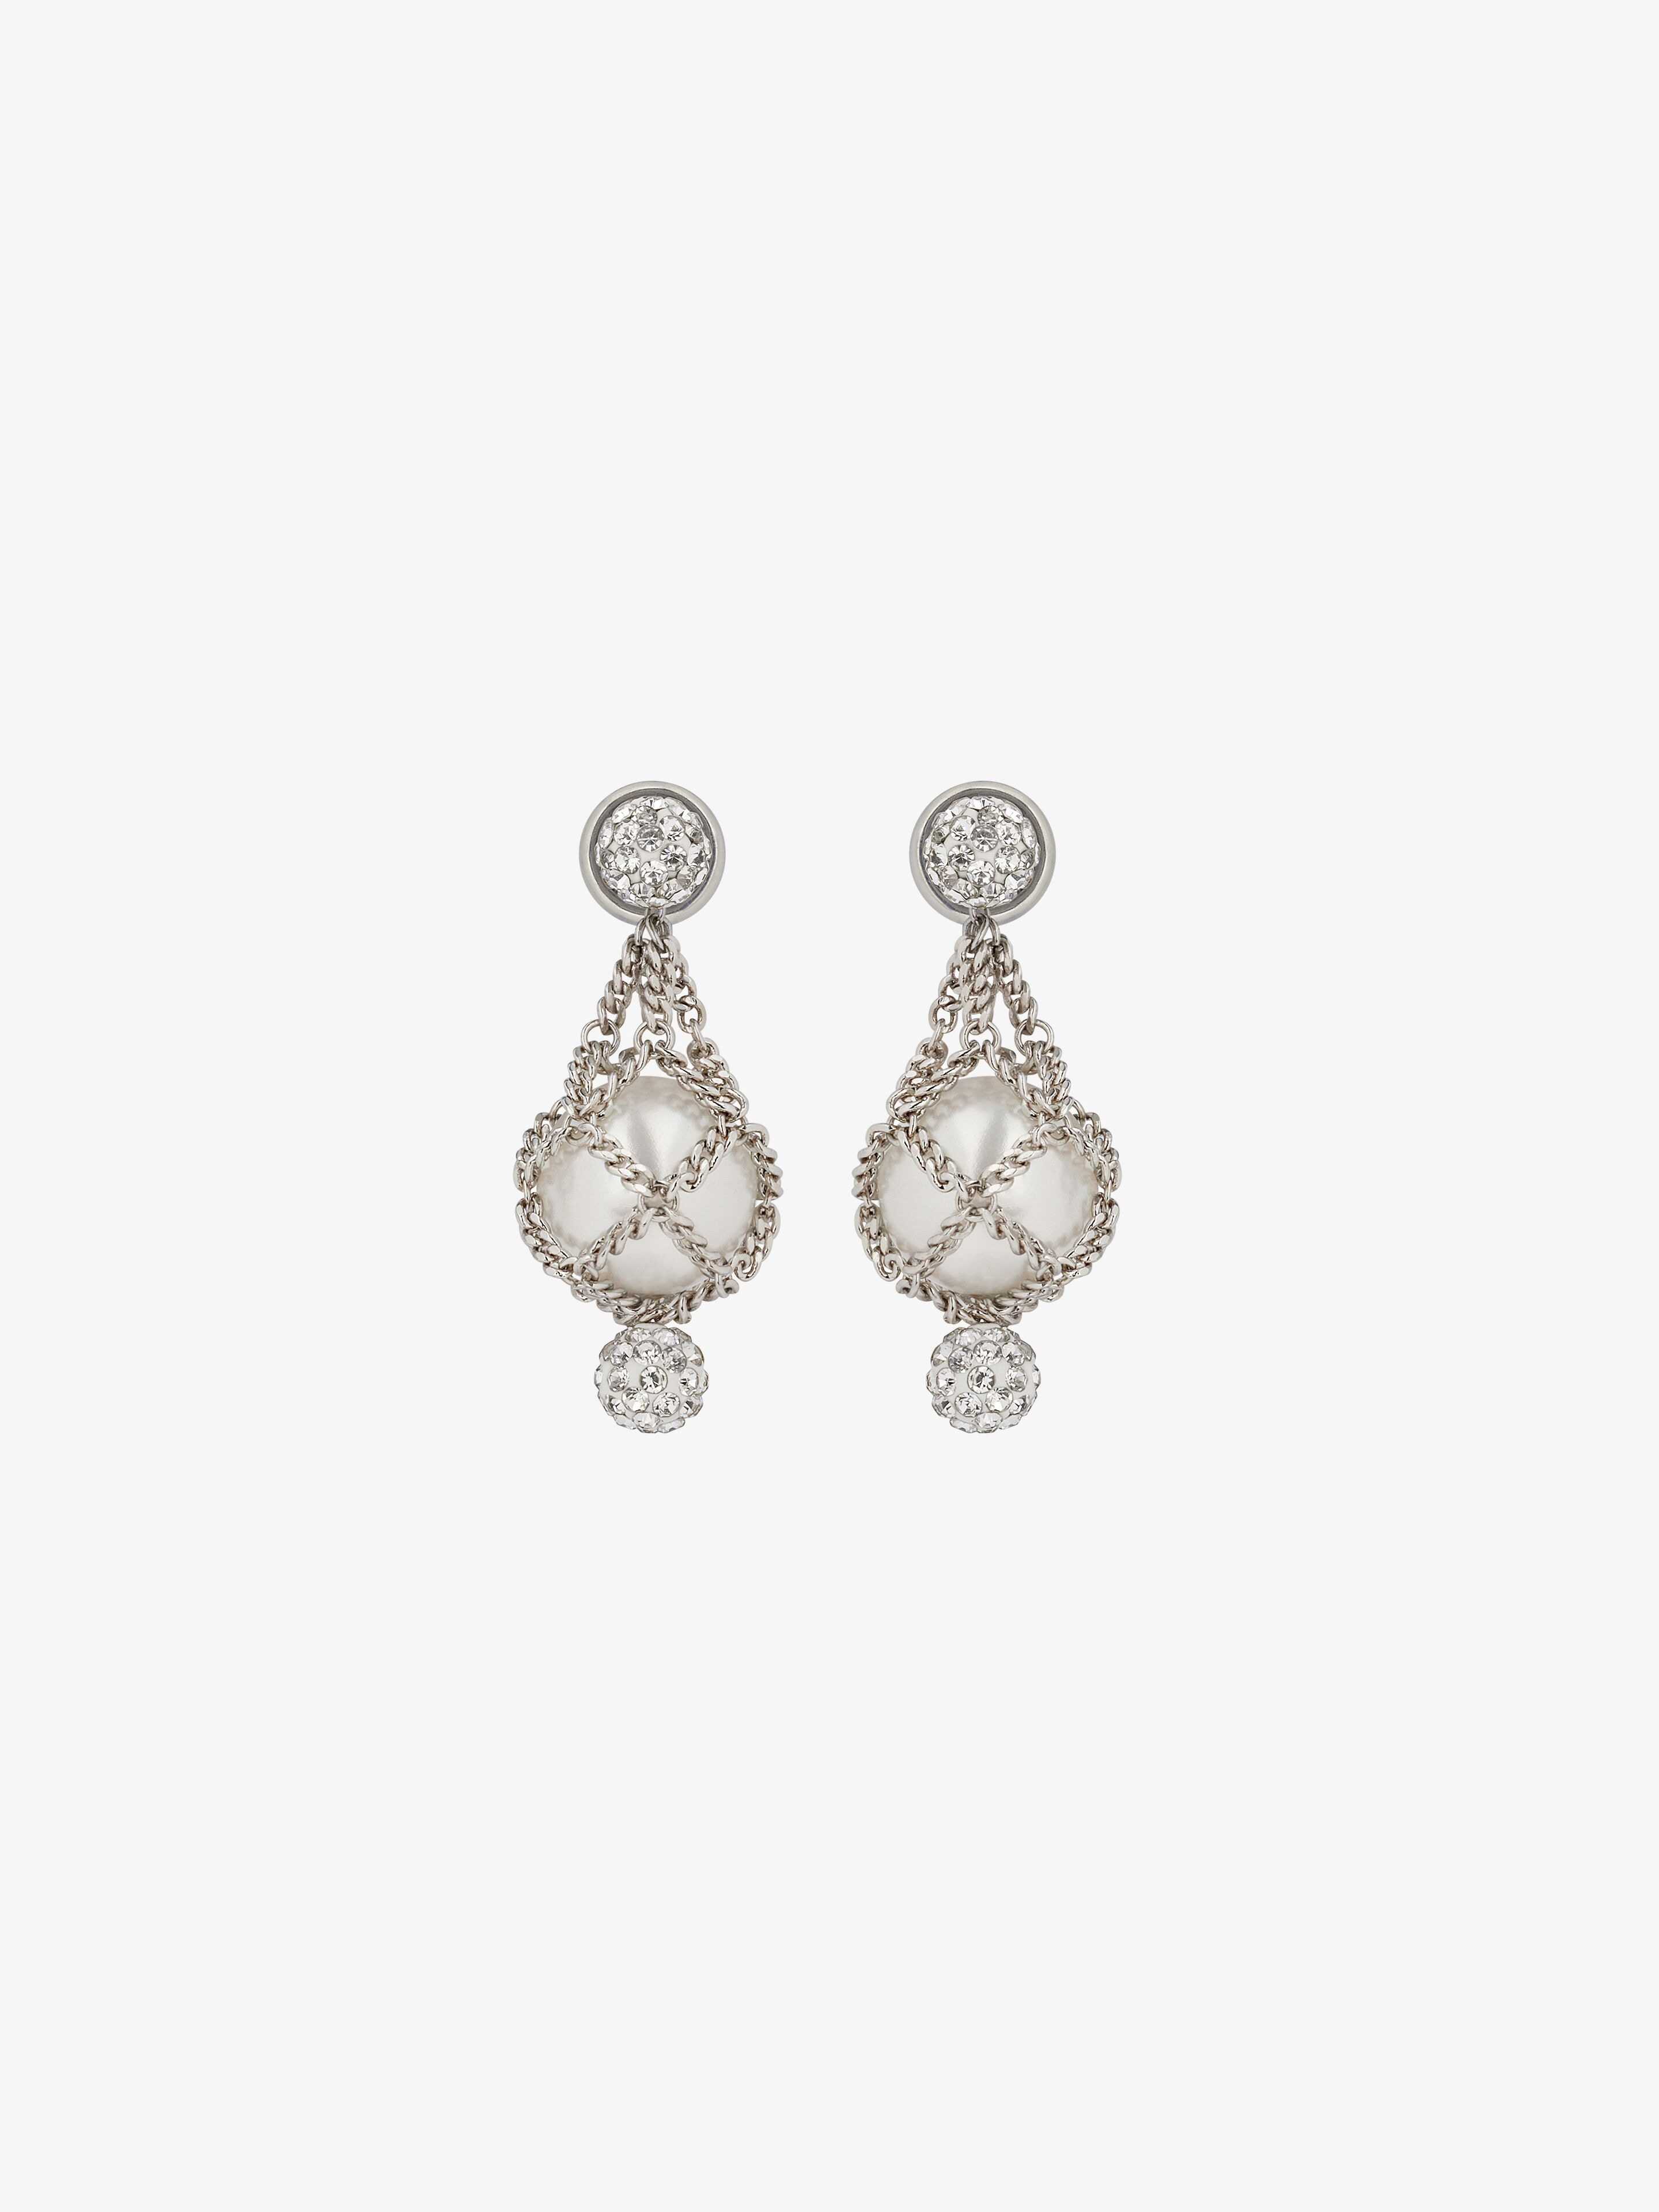 PEARLING EARRINGS IN METAL WITH PEARLS AND CRYSTALS - 1